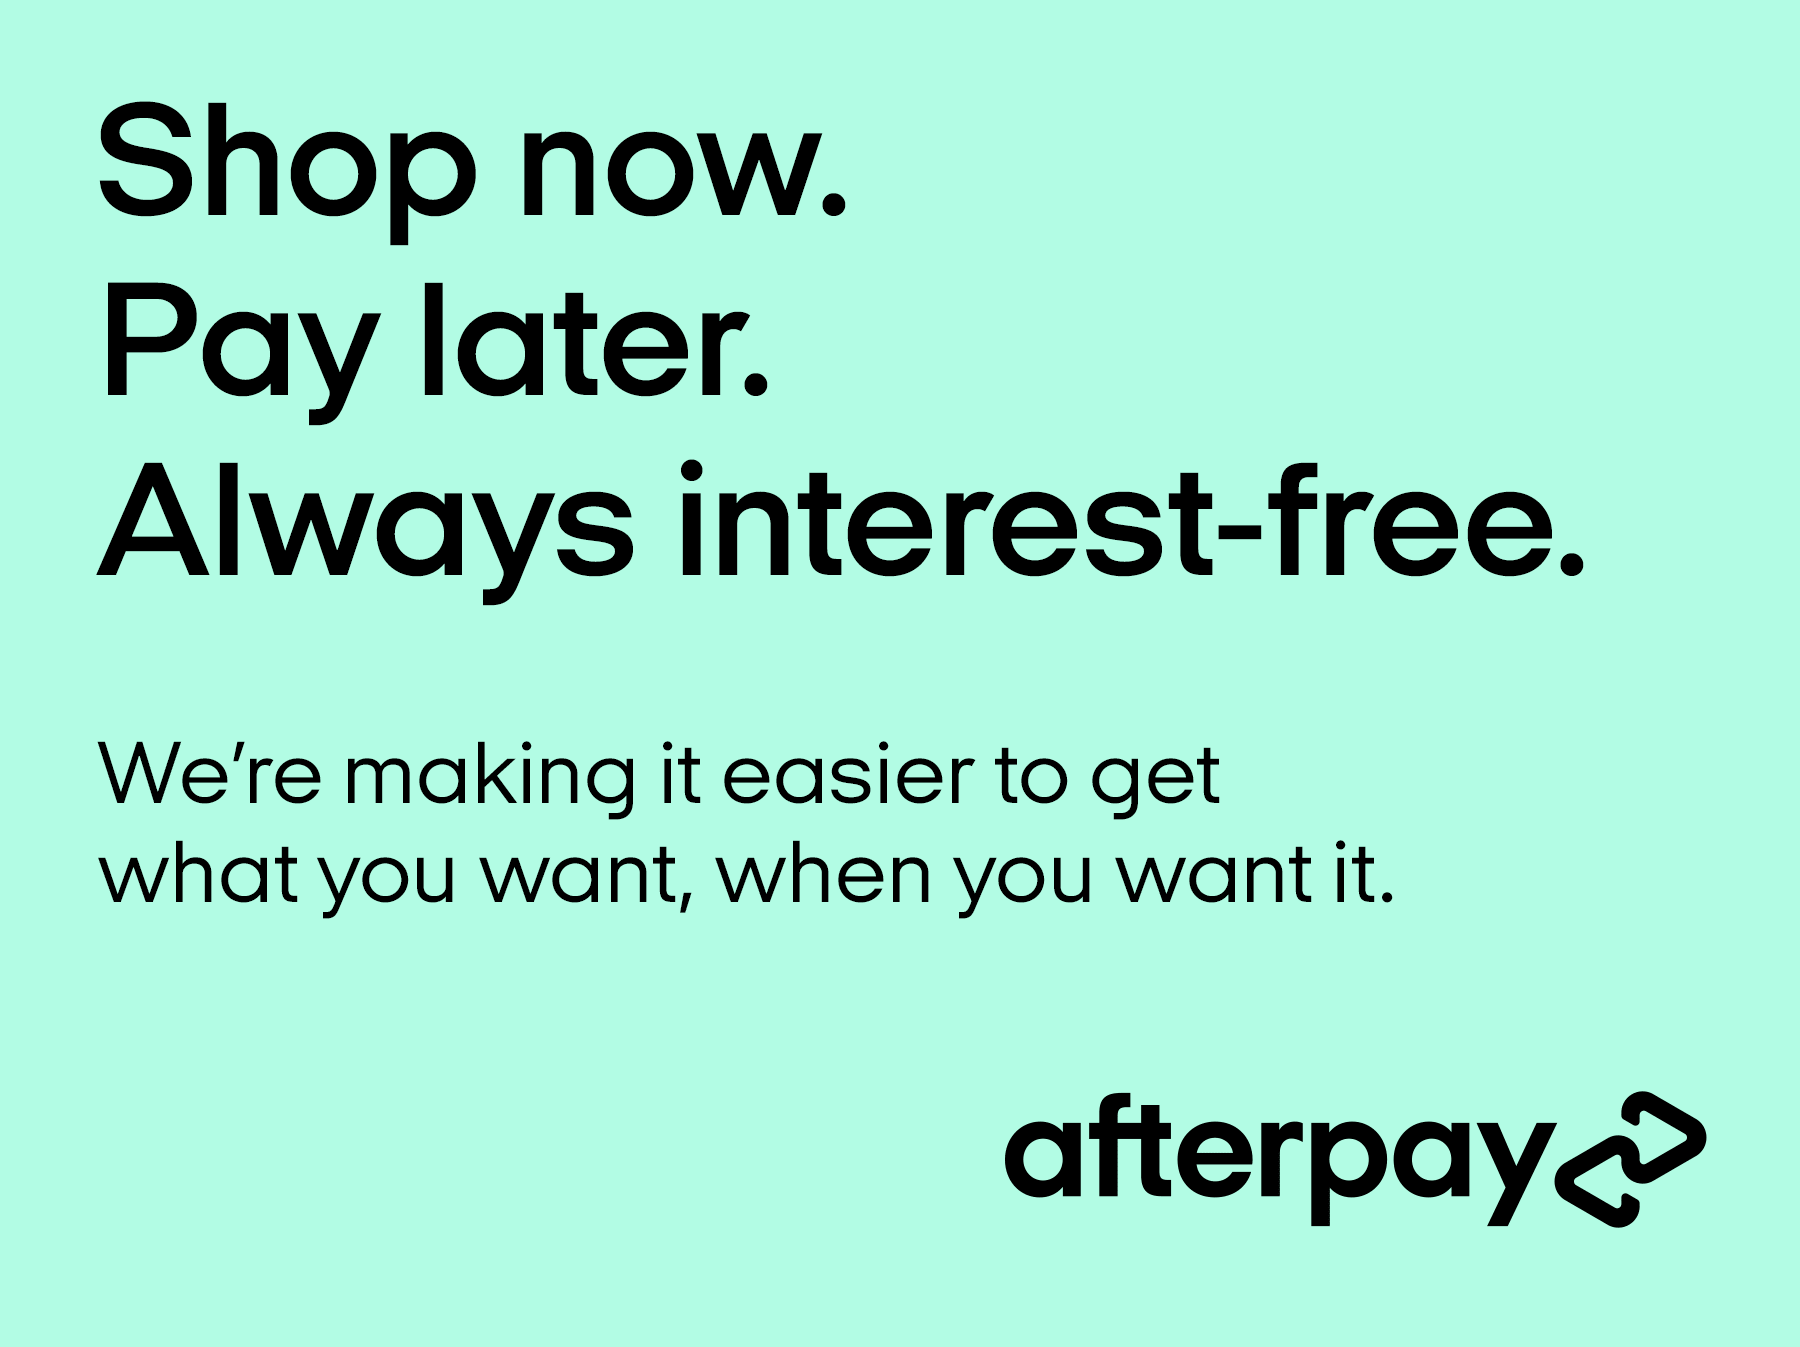 Afterpay wardrobes after-at kitchens afterpay shower screens interest free options 36 months interest free kitchen interest free kitchen wardrobe shower screen flooring buy now pay later afterpay near me interest free near me 